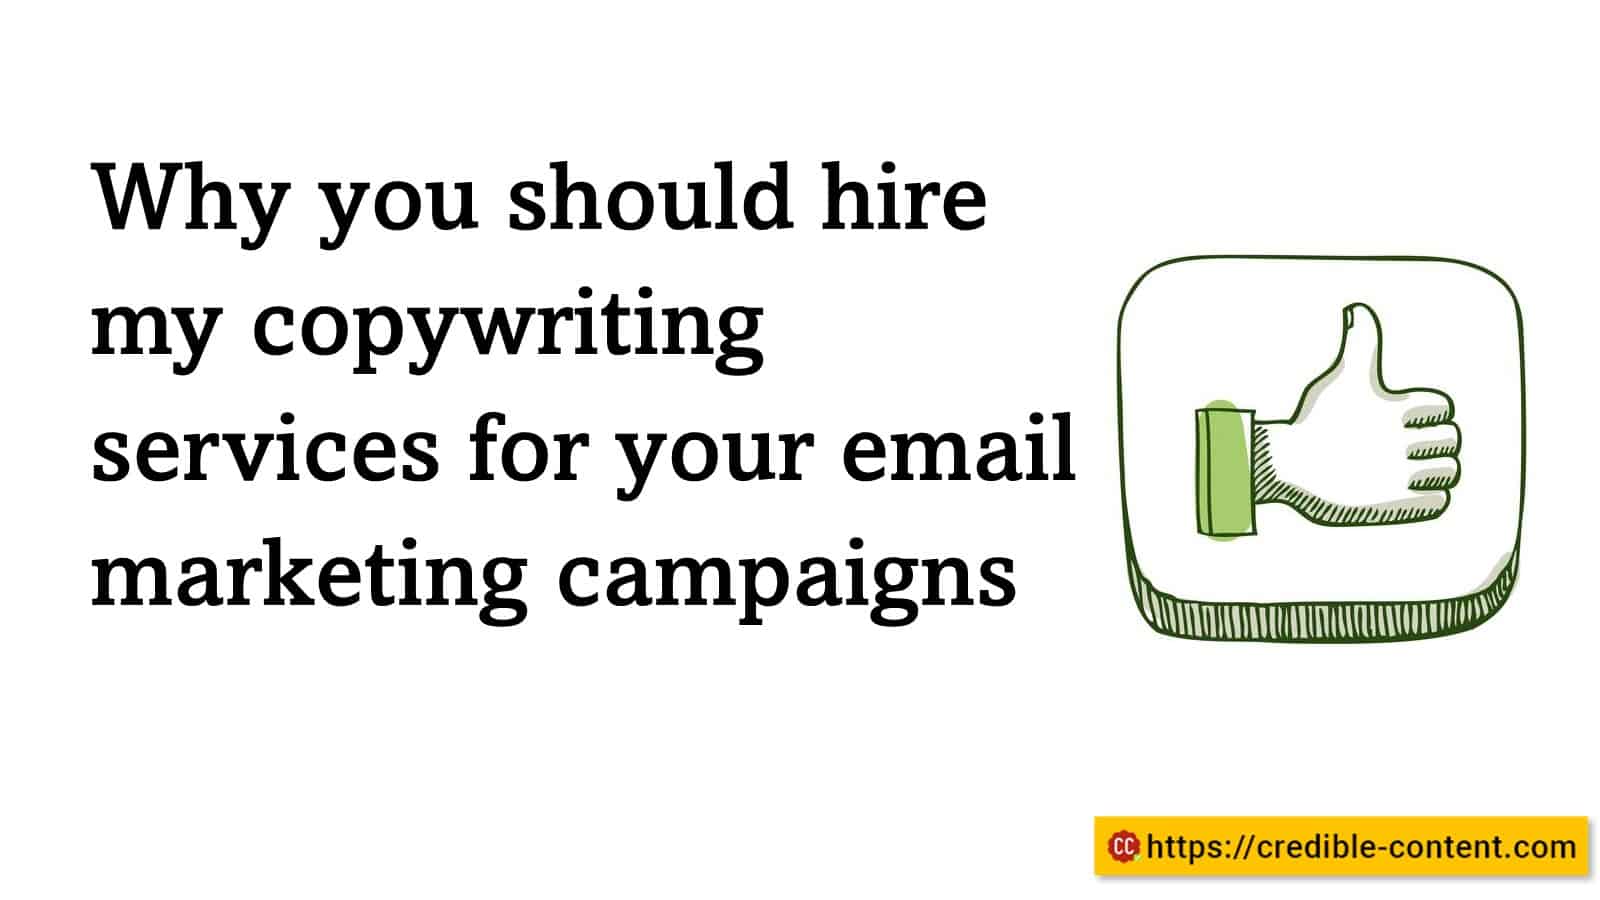 Why you should hire my copywriting services for your email marketing campaigns